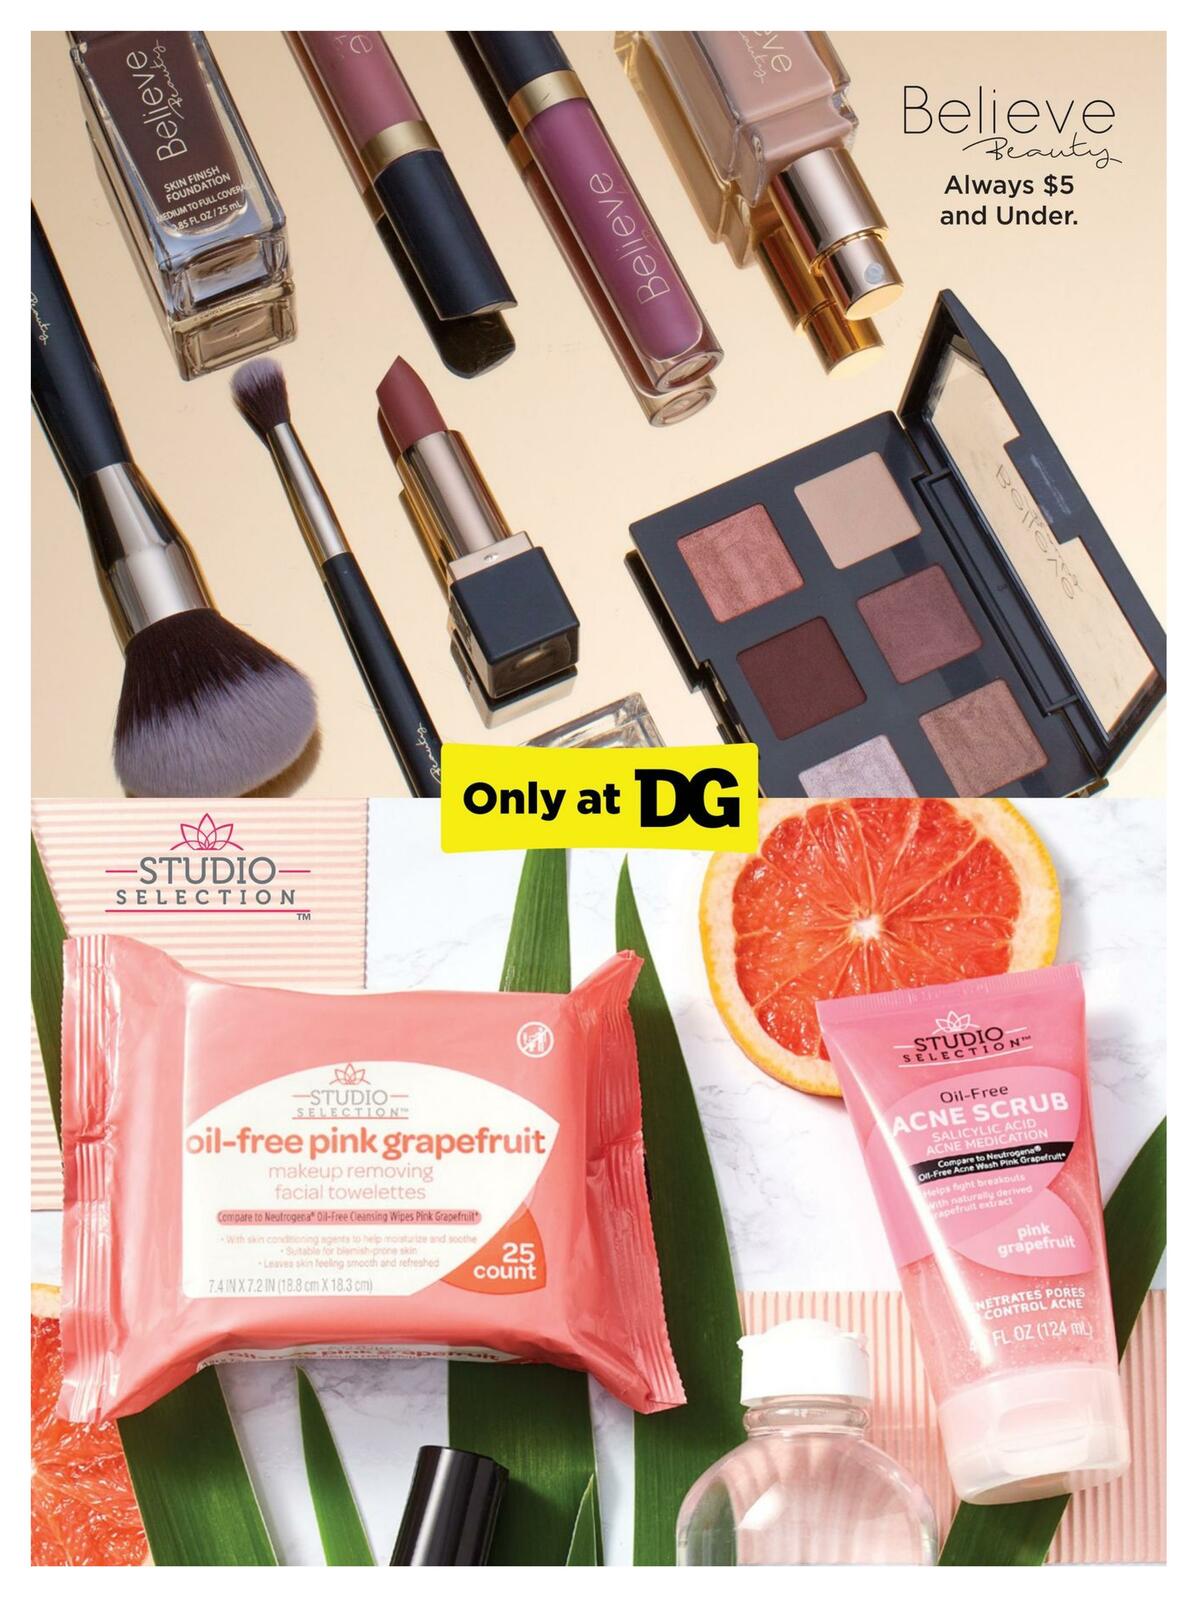 Dollar General Beauty Cents Magazine Weekly Ad from September 14